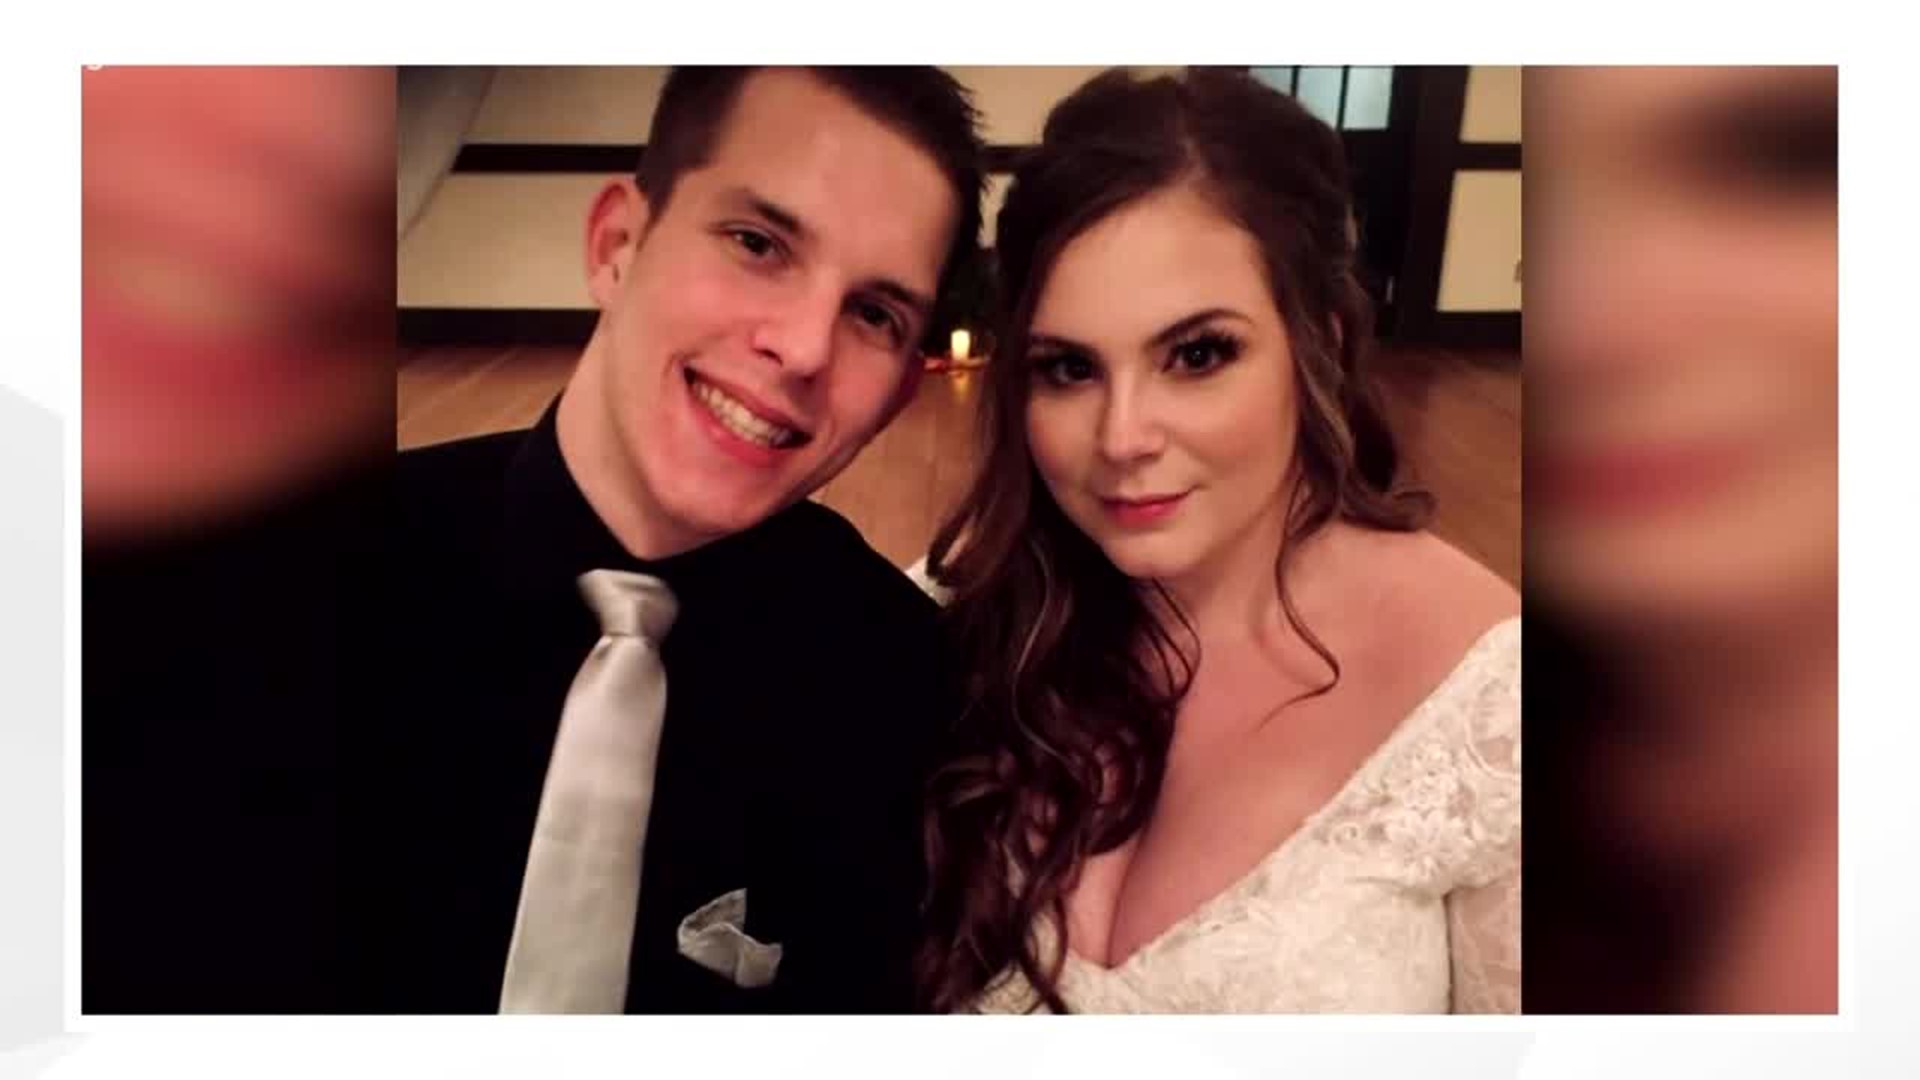 On Sunday, Taya and Collin were married. They're heading off to Disneyland for their honeymoon.